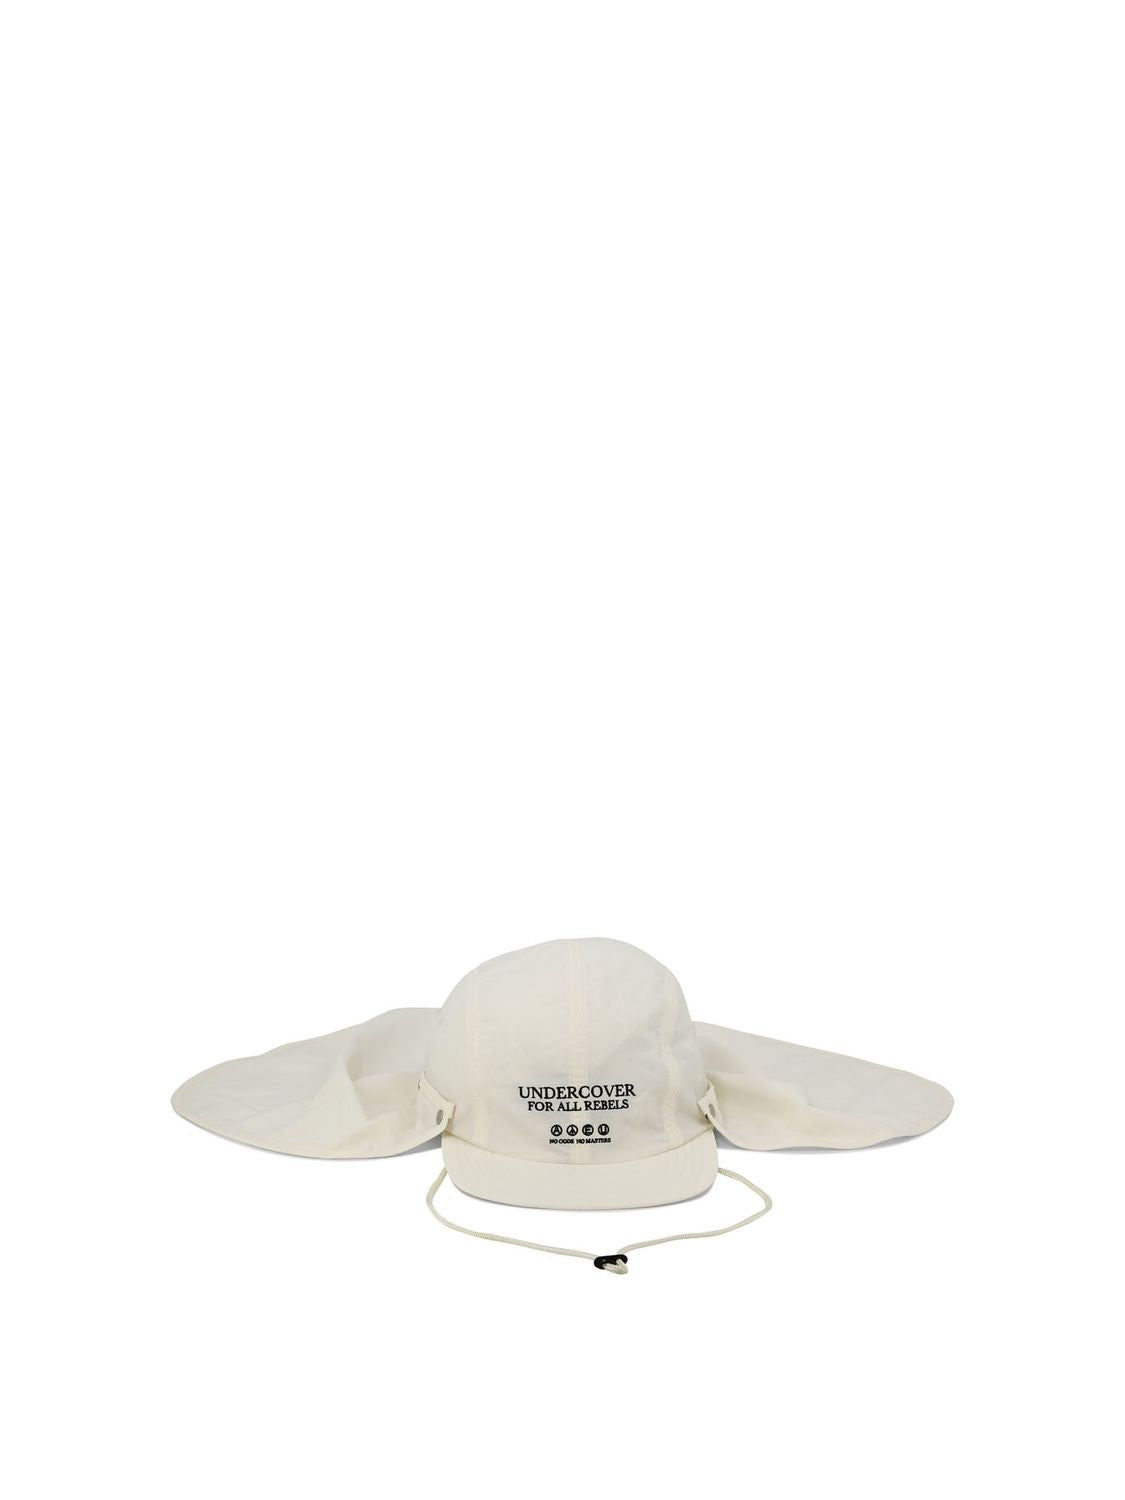 Undercover " For All Rebels" Cap In White